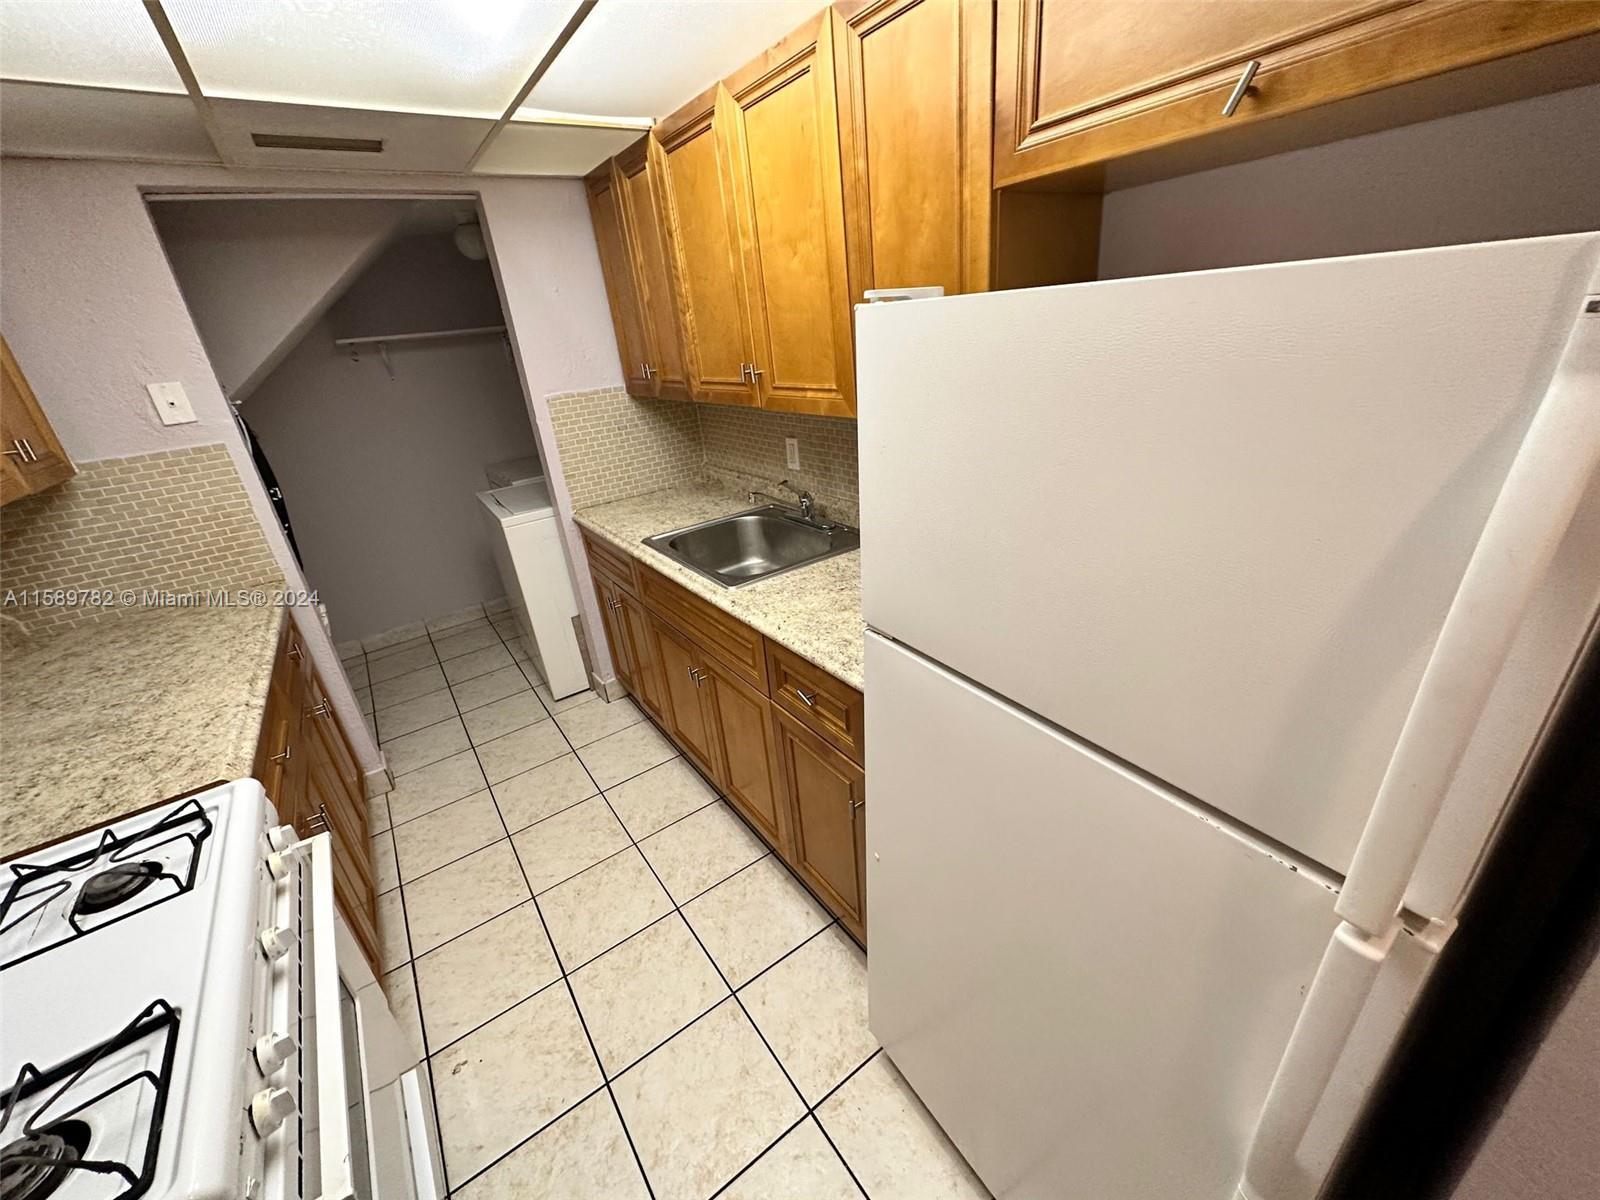 a view of a utility room with washer and dryer